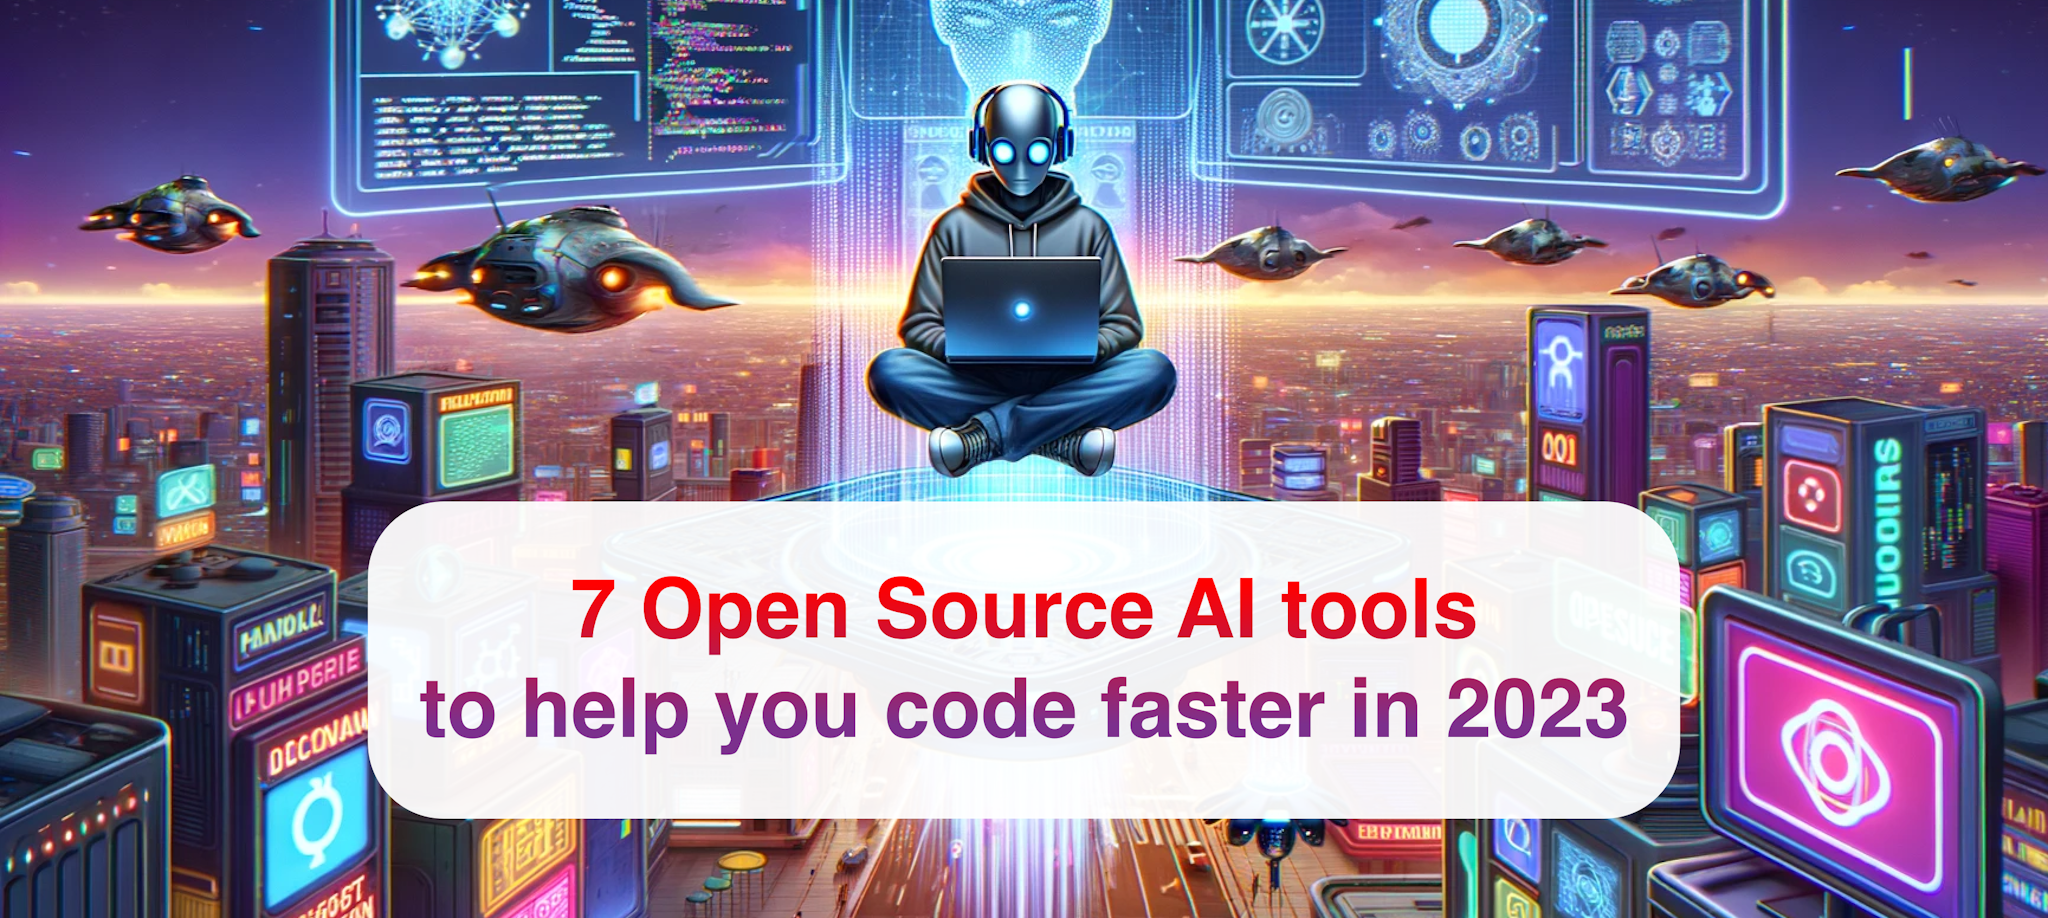 7 Open Source AI projects to code faster in 2023